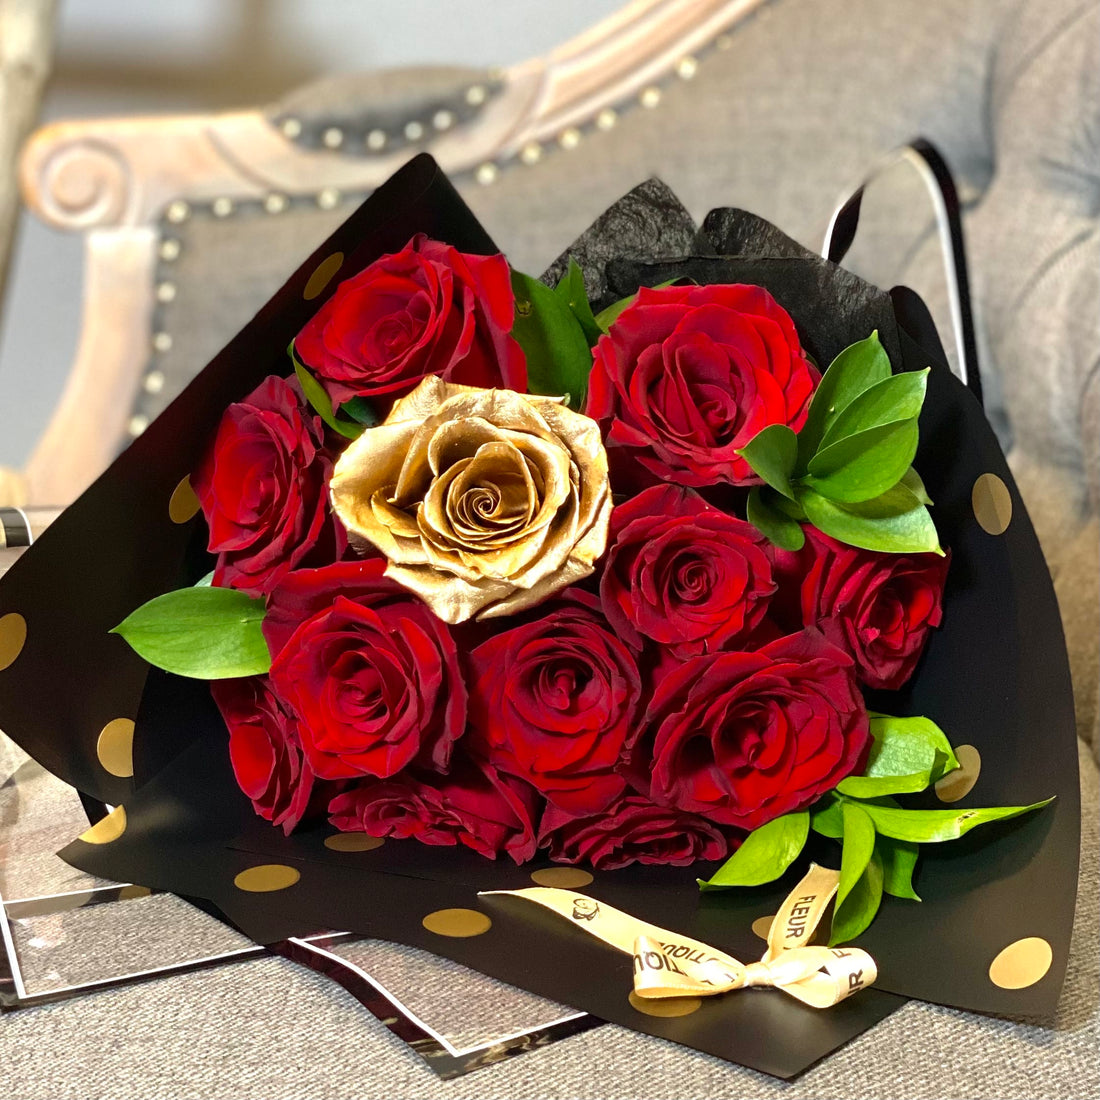 Golden Love - Hand Tied Red Rose Bouquet with Golden Rose